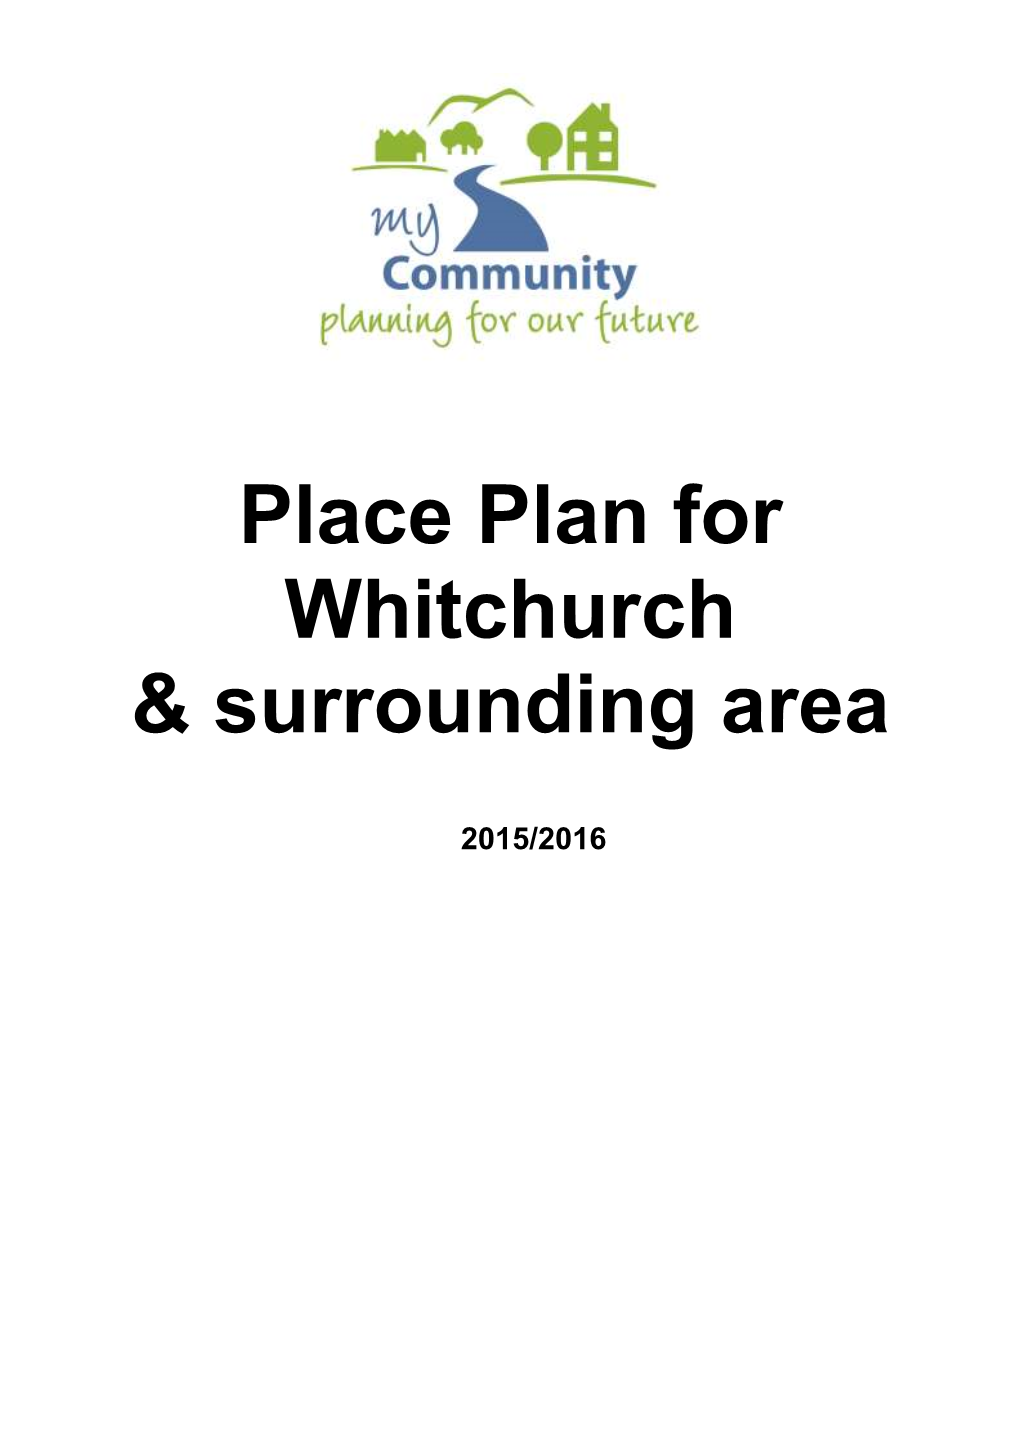 Place Plan for Whitchurch & Surrounding Area